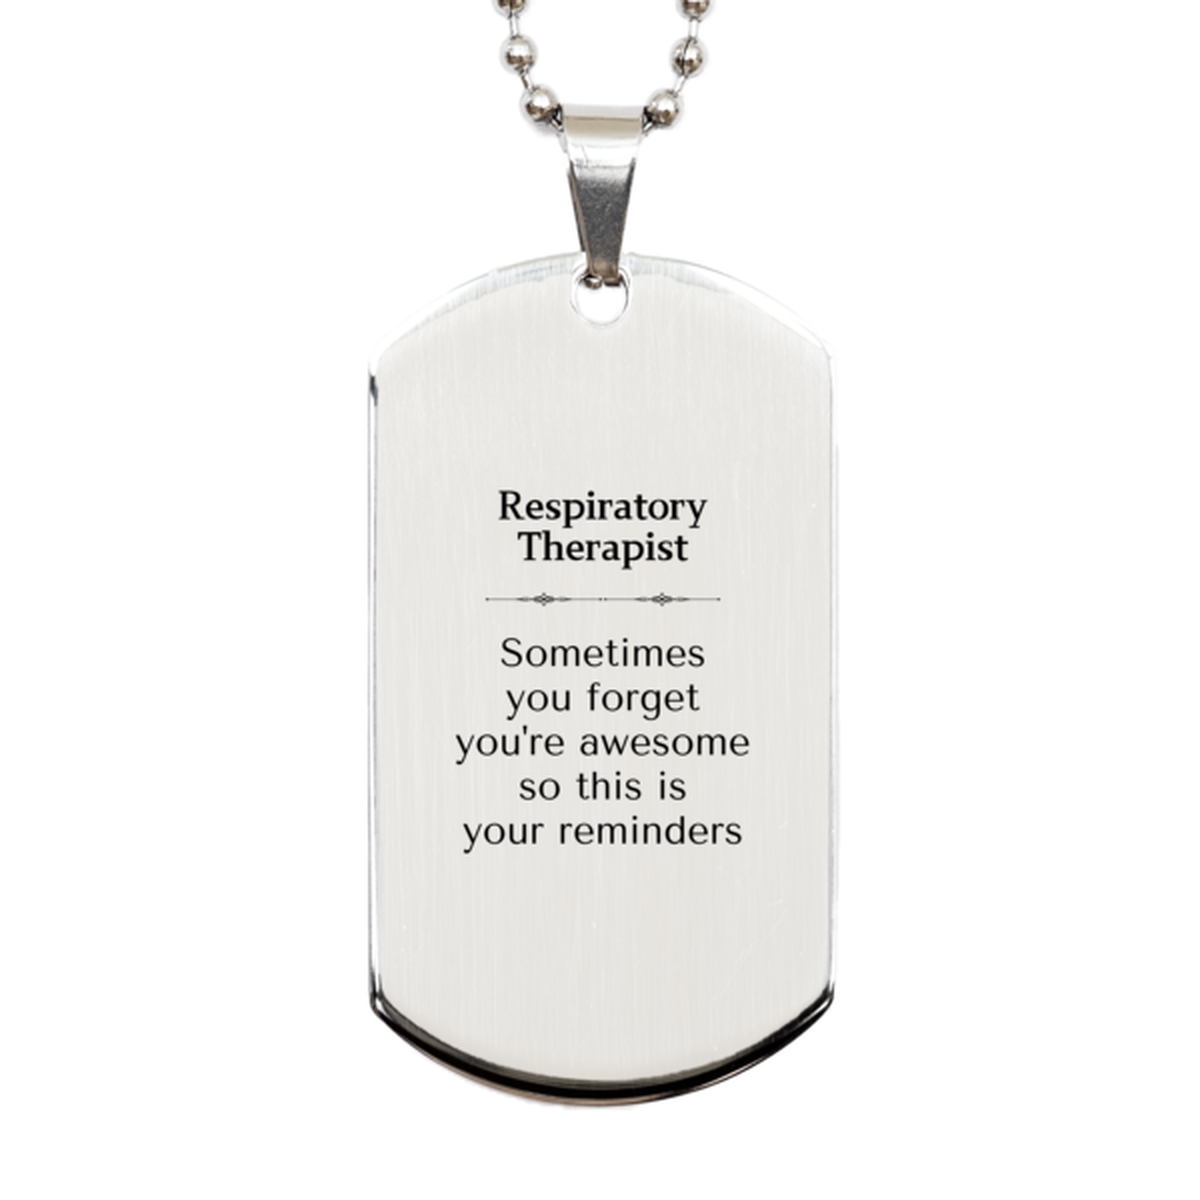 Sentimental Respiratory Therapist Silver Dog Tag, Respiratory Therapist Sometimes you forget you're awesome so this is your reminders, Graduation Christmas Birthday Gifts for Respiratory Therapist, Men, Women, Coworkers